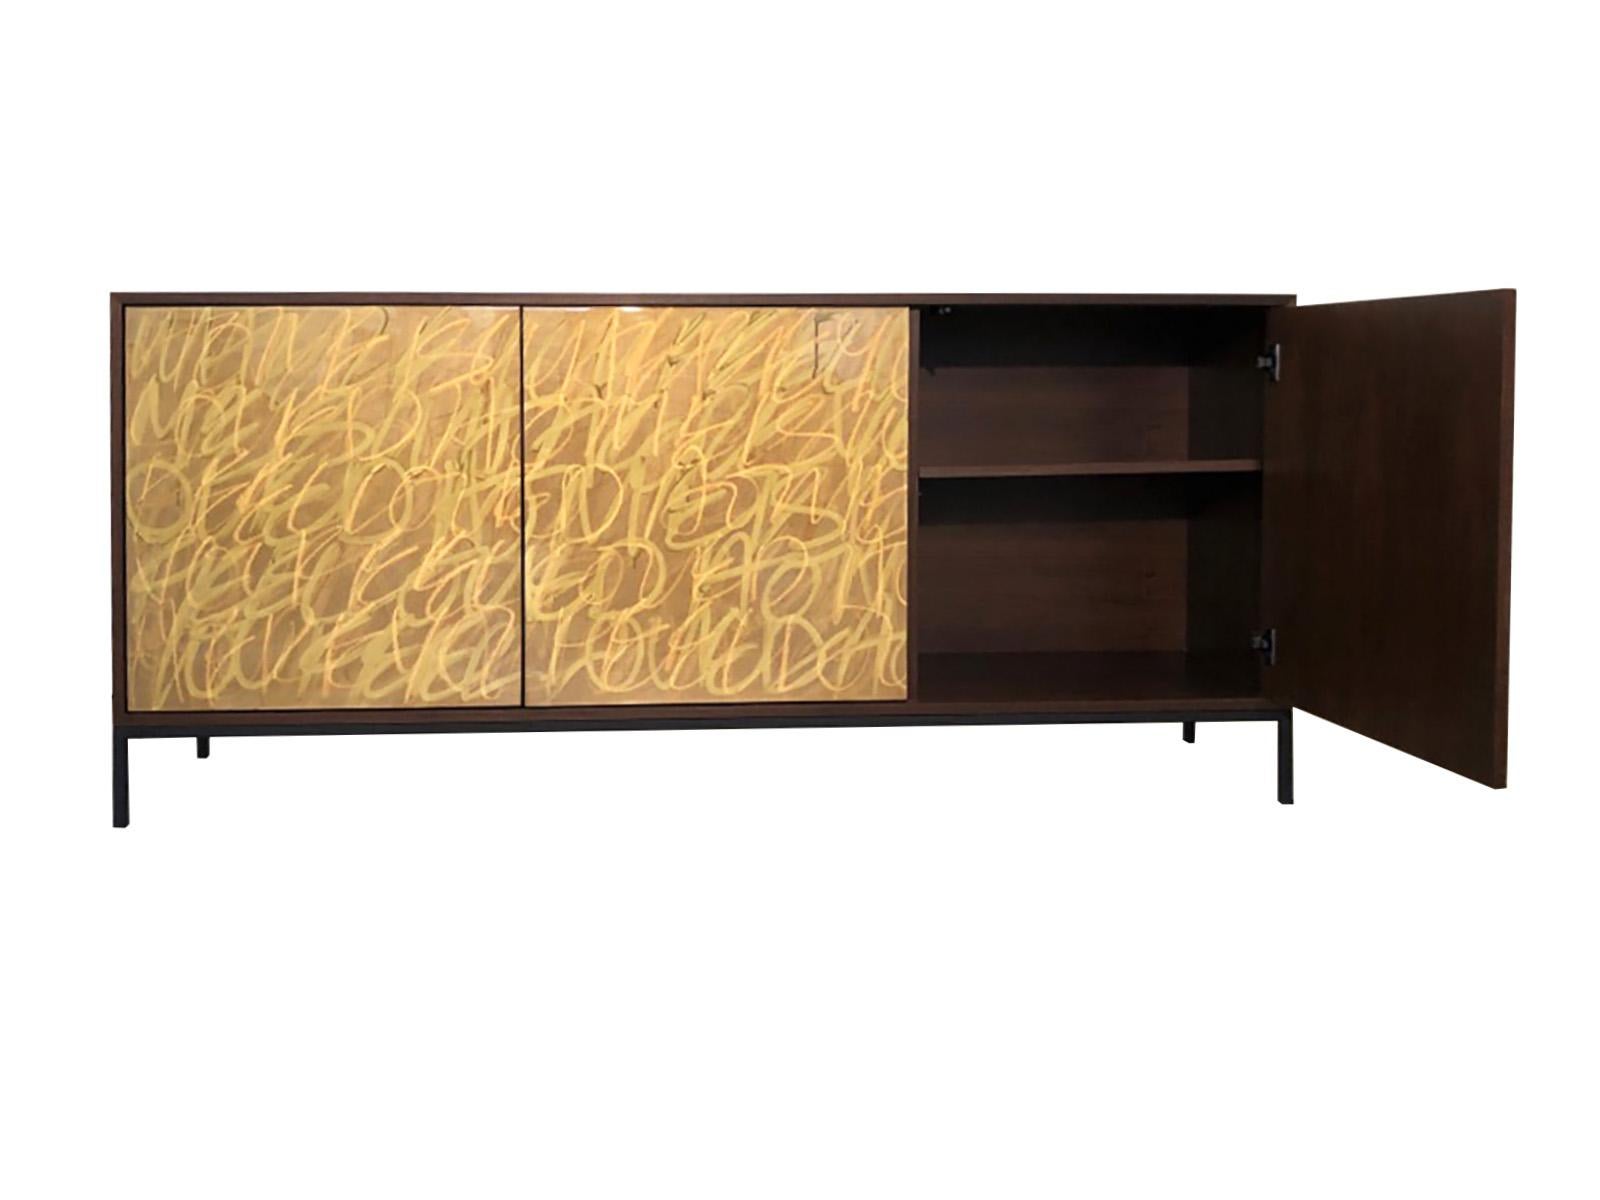 The Gold Graffiti Cabinet is designed and finished by hand in our Toronto studio.

The Gold Graffiti Cabinet is constructed of solid core walnut, body and doors.  The cabinet sits on a steel base finished in a matte black powder coat.

The walnut